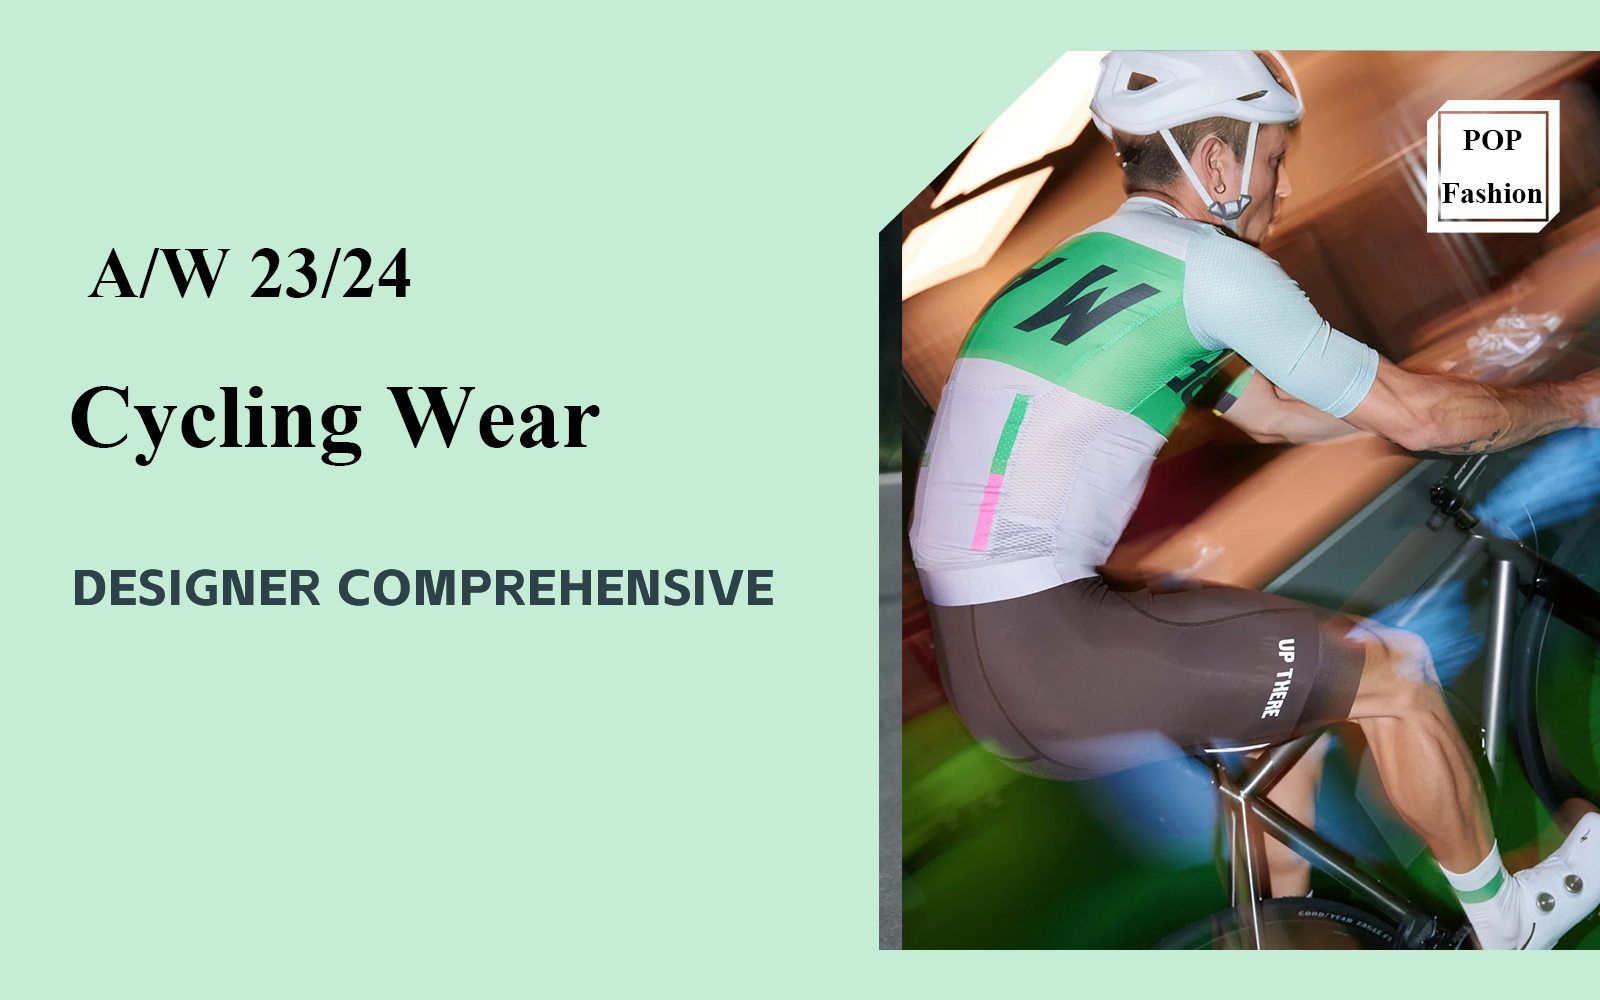 The Comprehensive Analysis of Cycling Wear Designer Brands